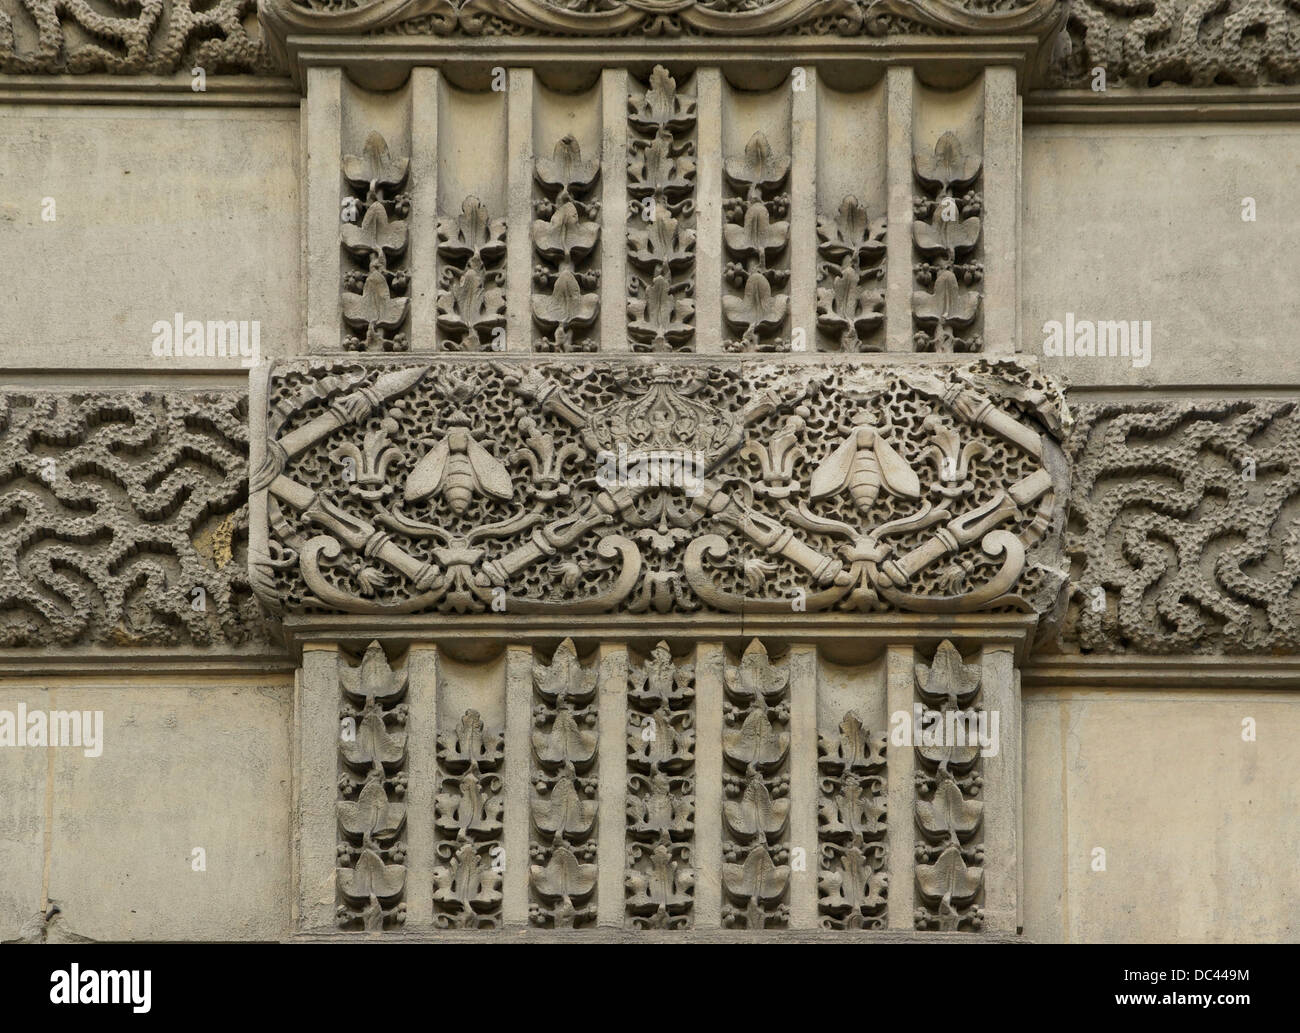 Details of sculpted decorations visibles on the walls of the Louvre Palace in Paris. One can see an imperial crown, sceptres, an Stock Photo